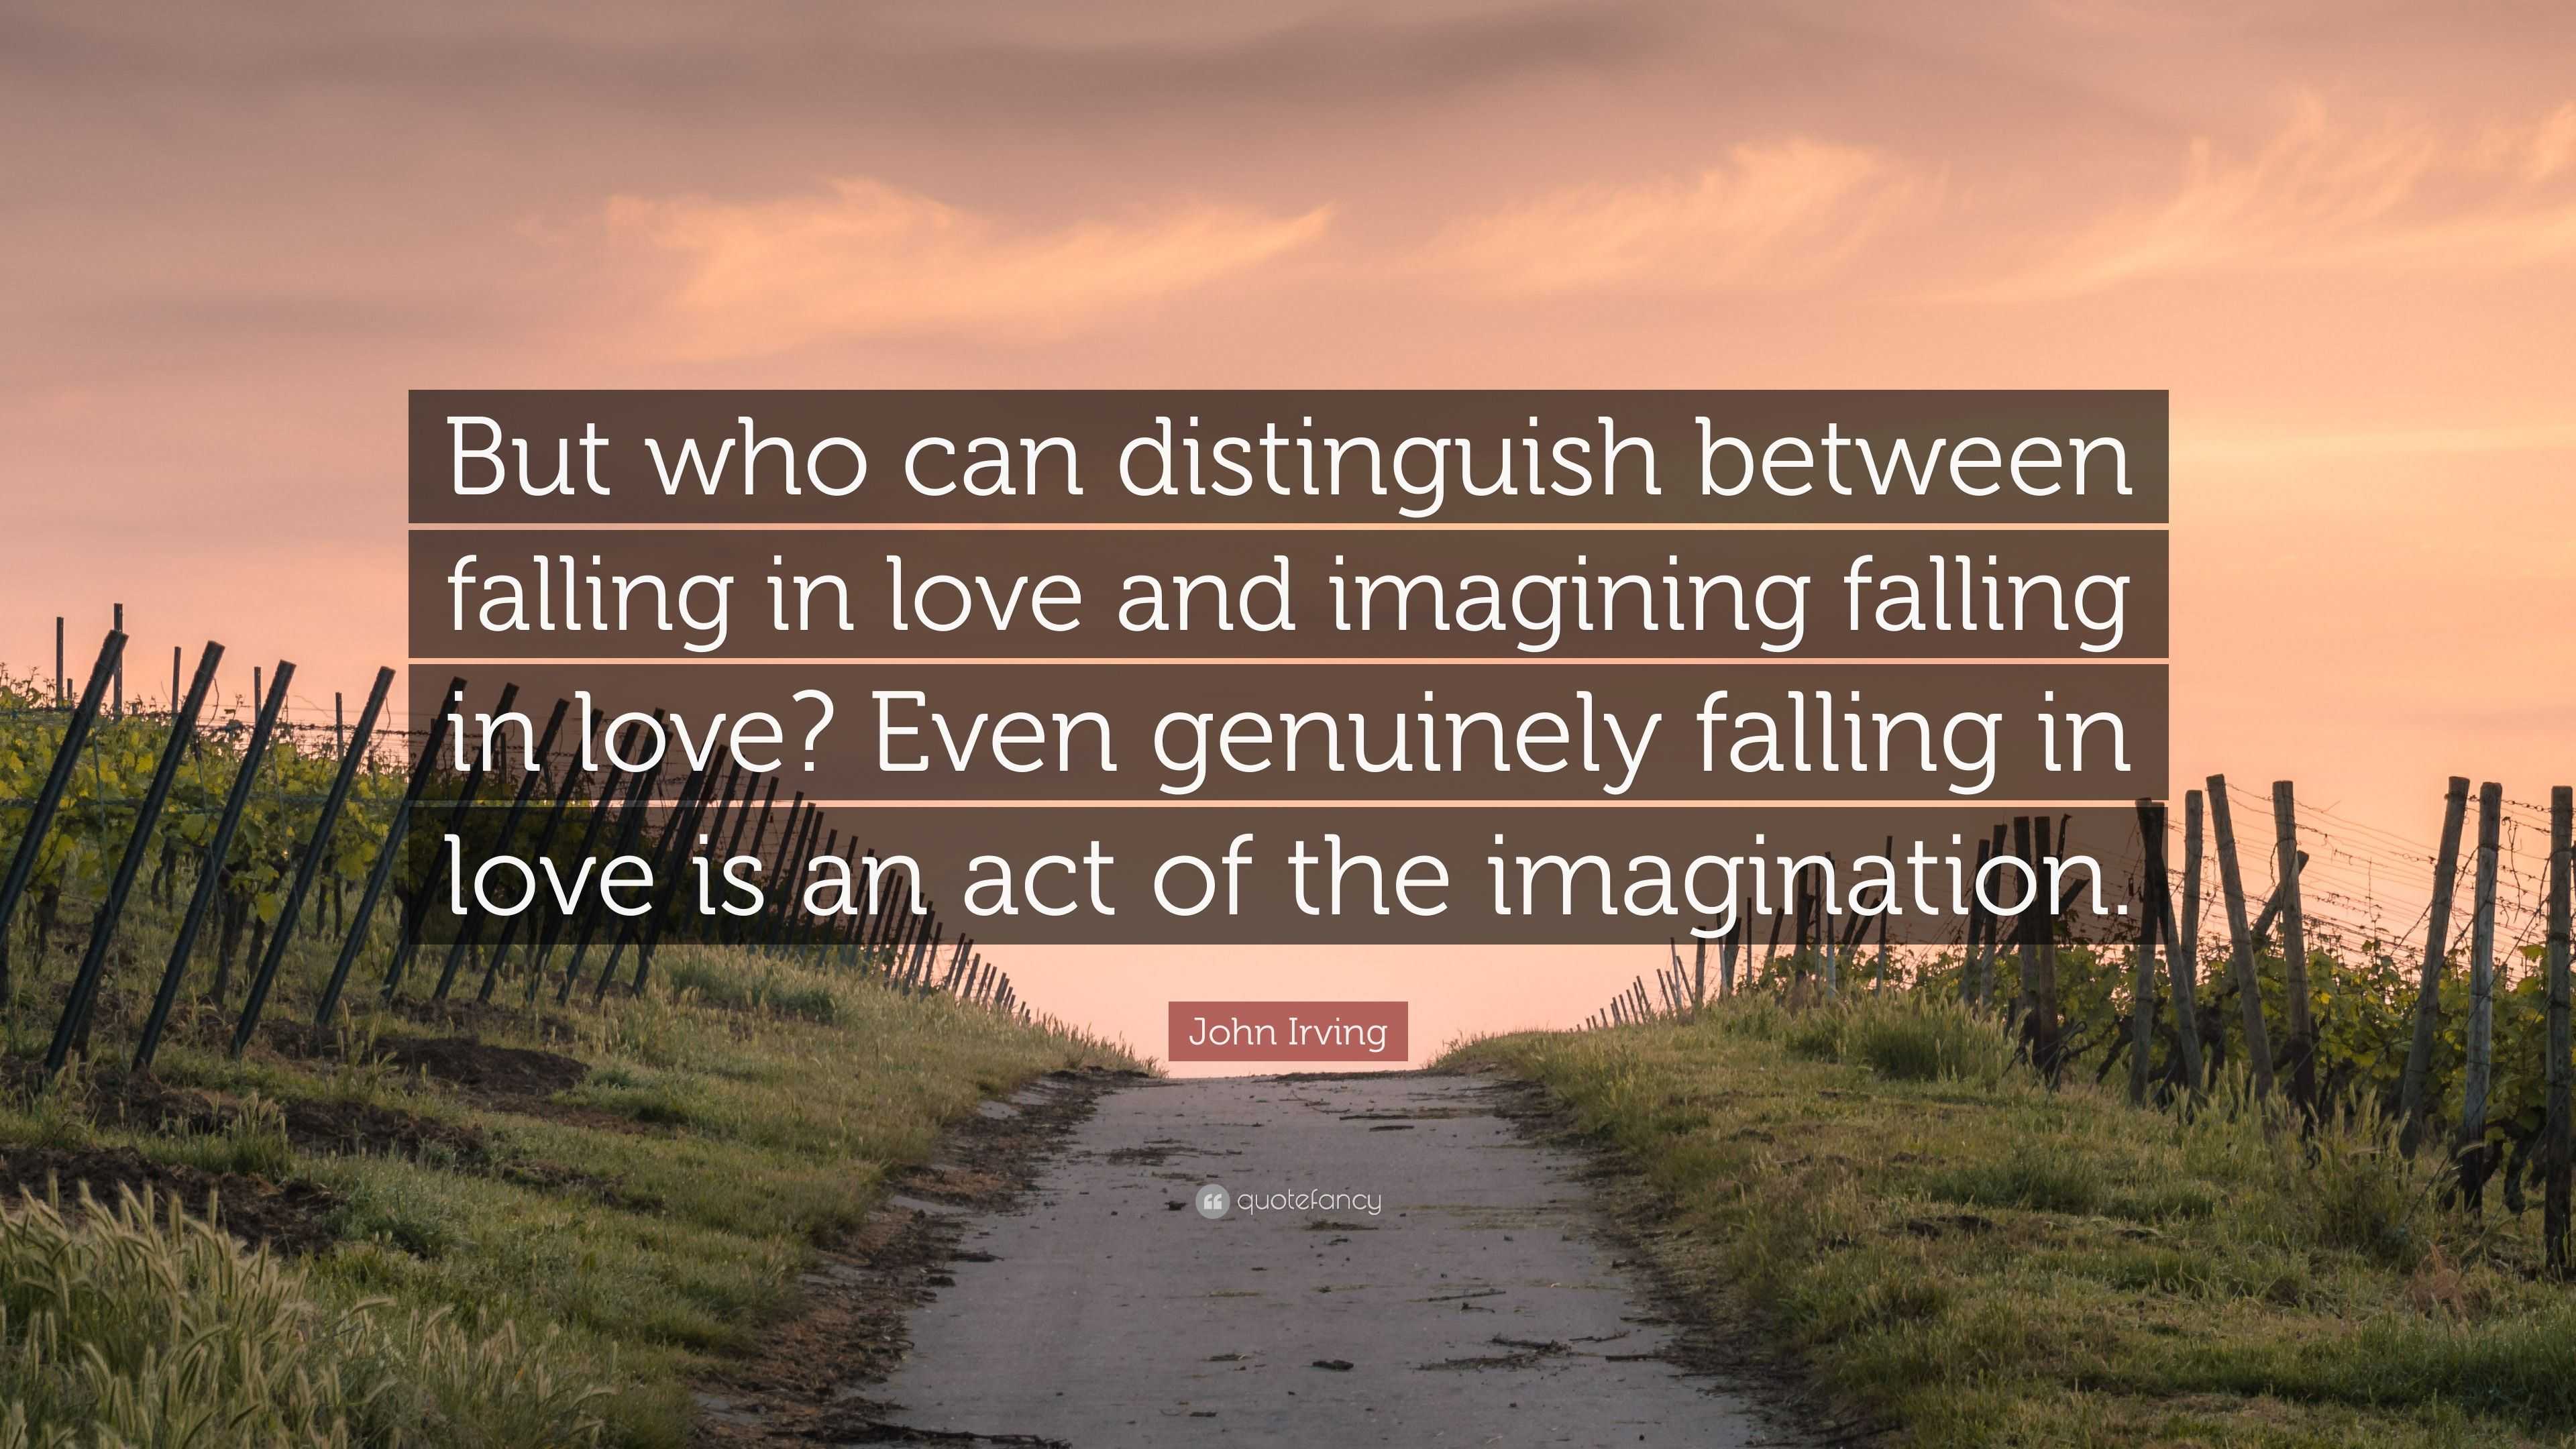 John Irving Quote: “But who can distinguish between falling in love and ...